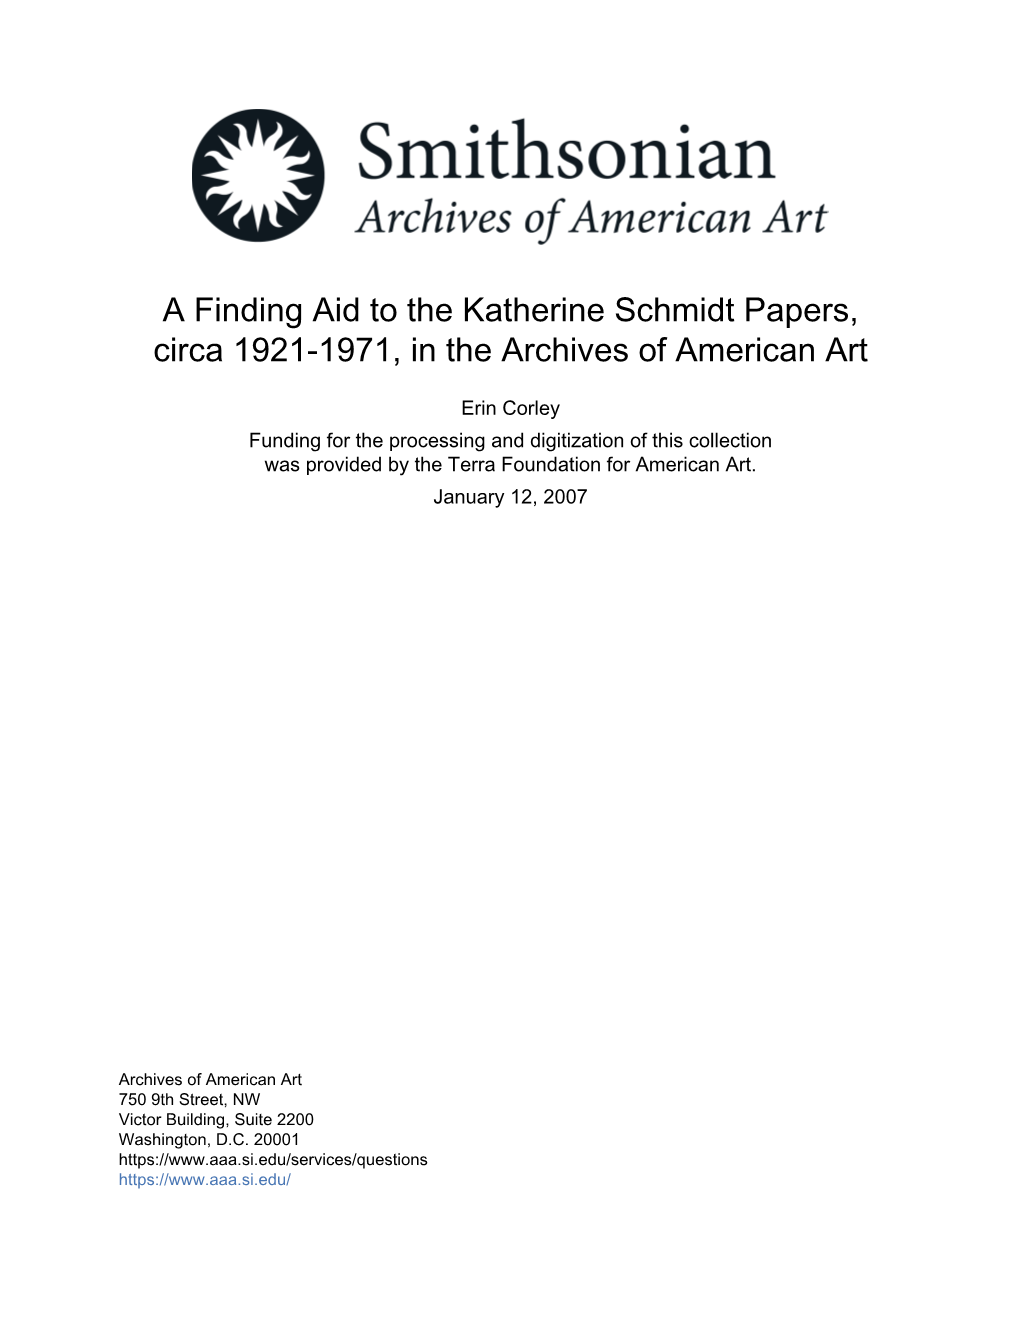 A Finding Aid to the Katherine Schmidt Papers, Circa 1921-1971, in the Archives of American Art